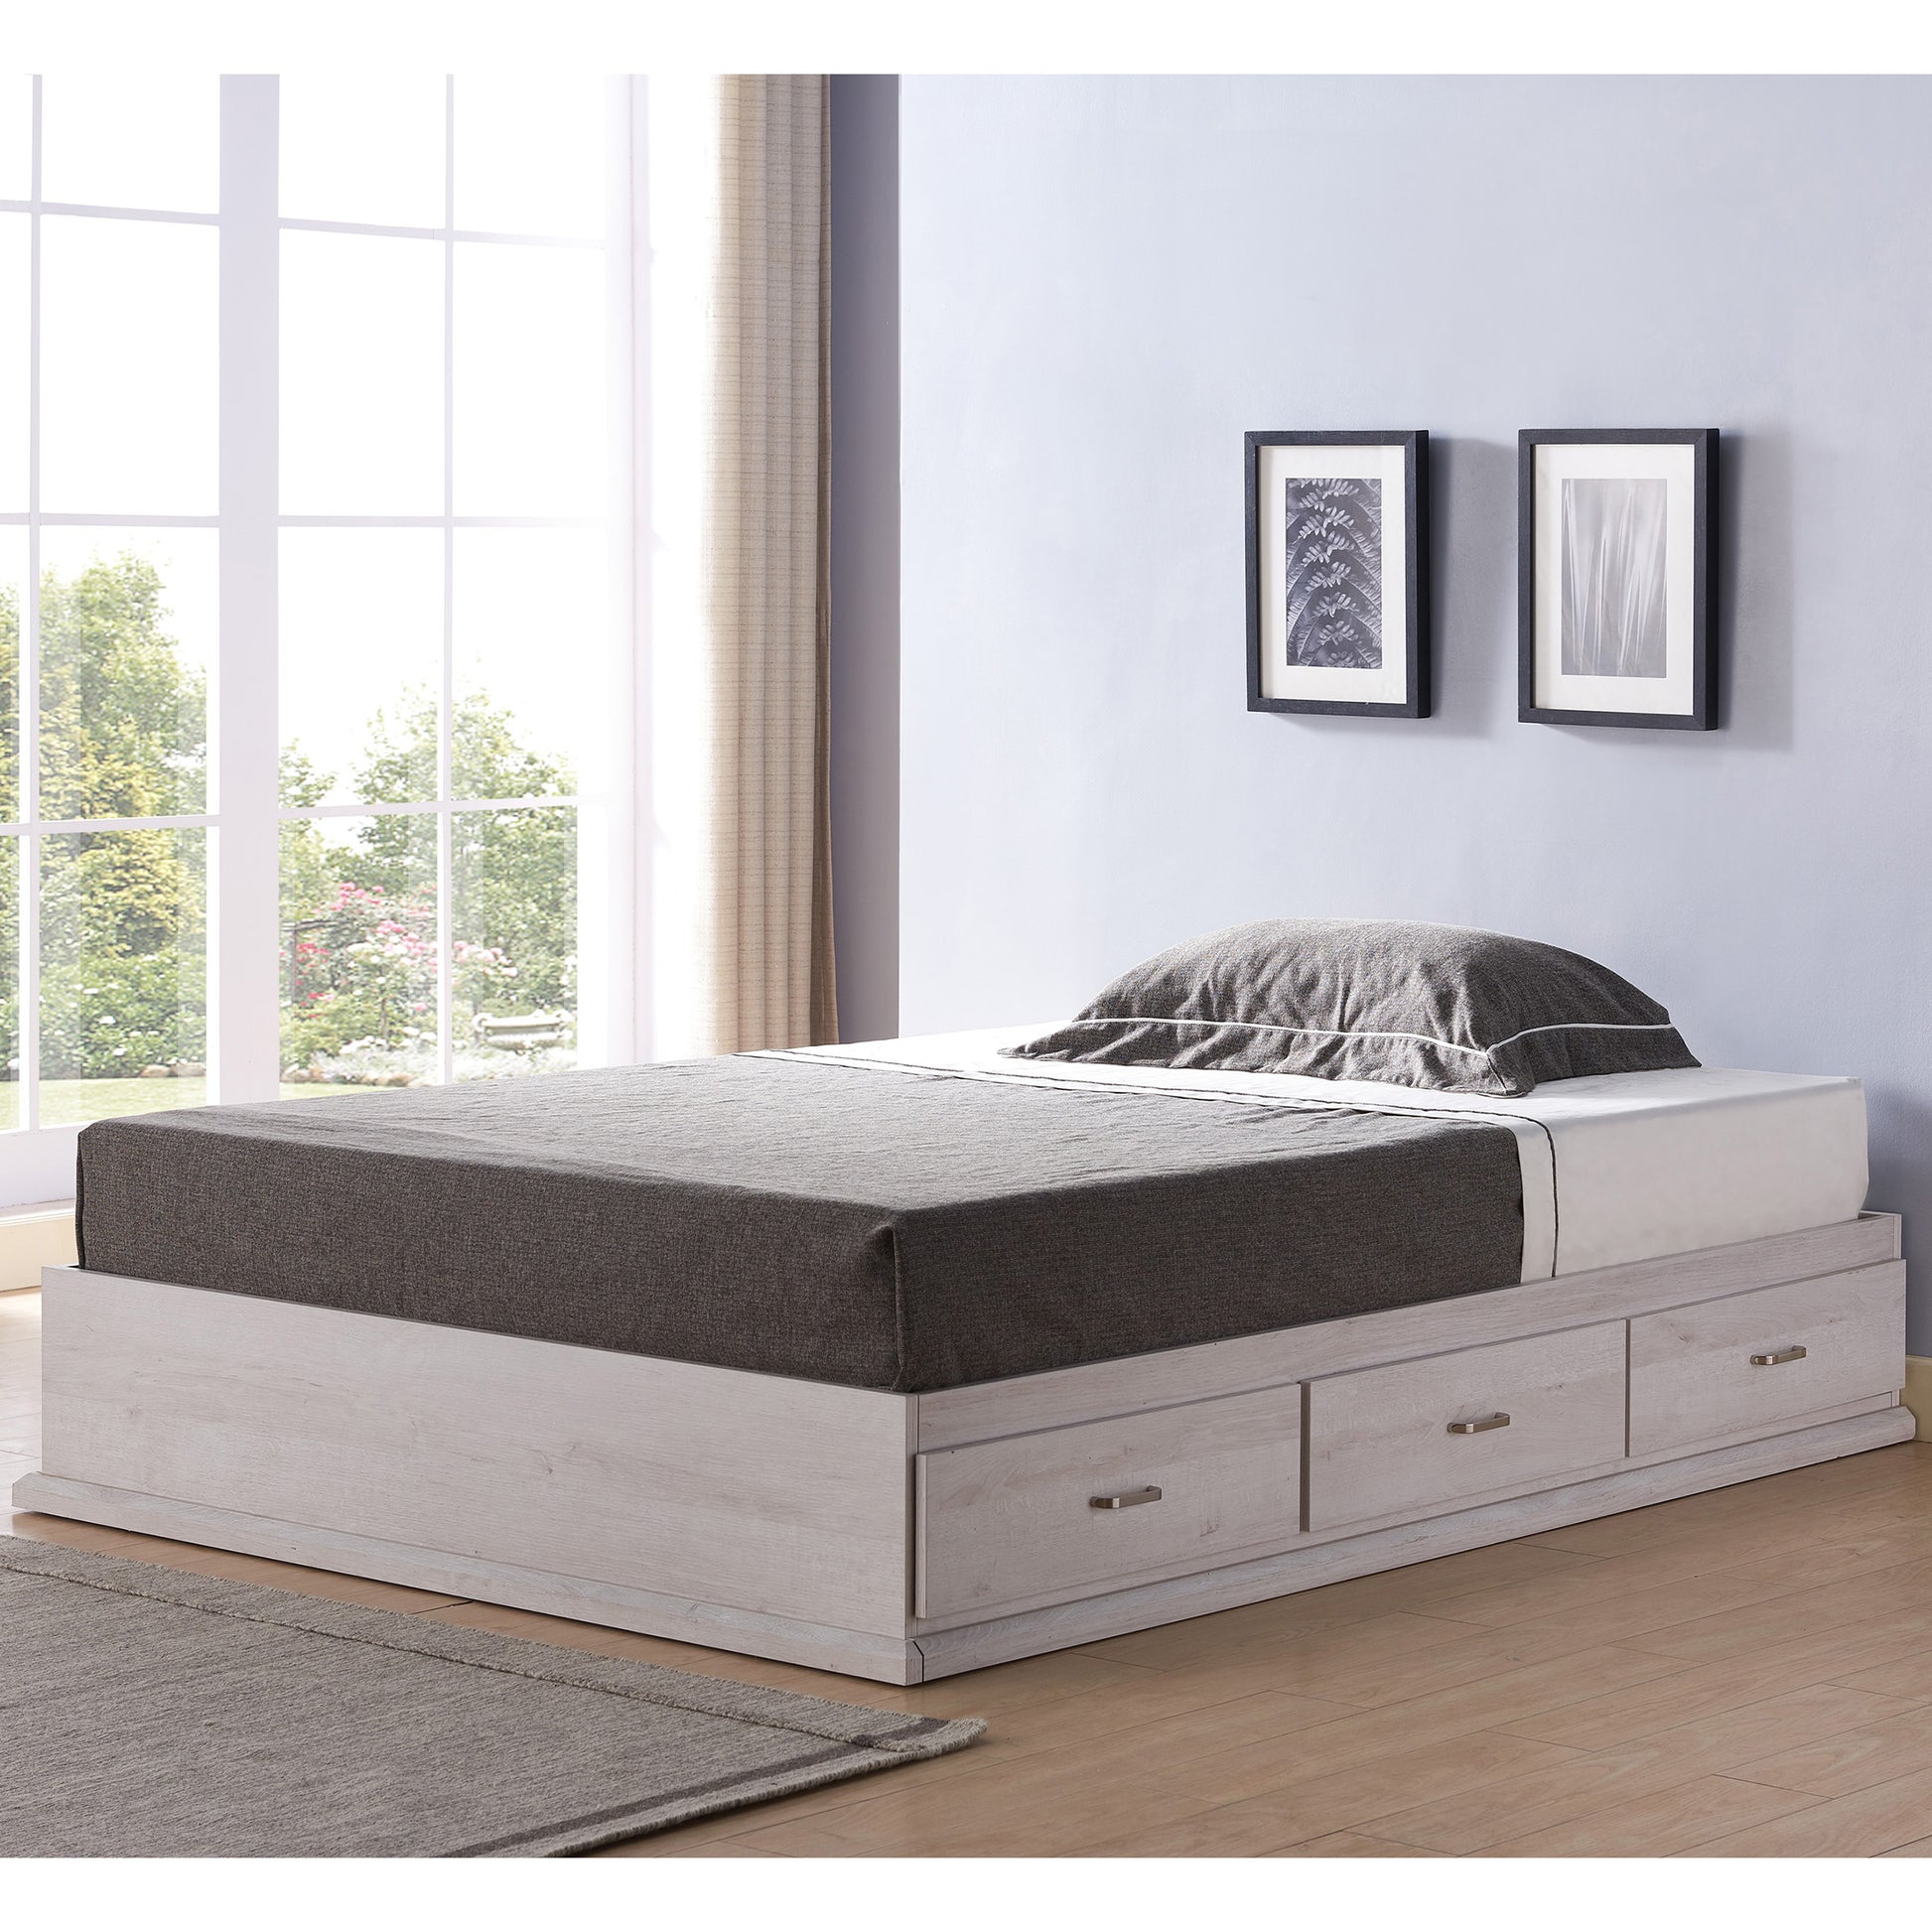 Left angled contemporary white oak three-drawer platform storage bed in a bedroom with accessories